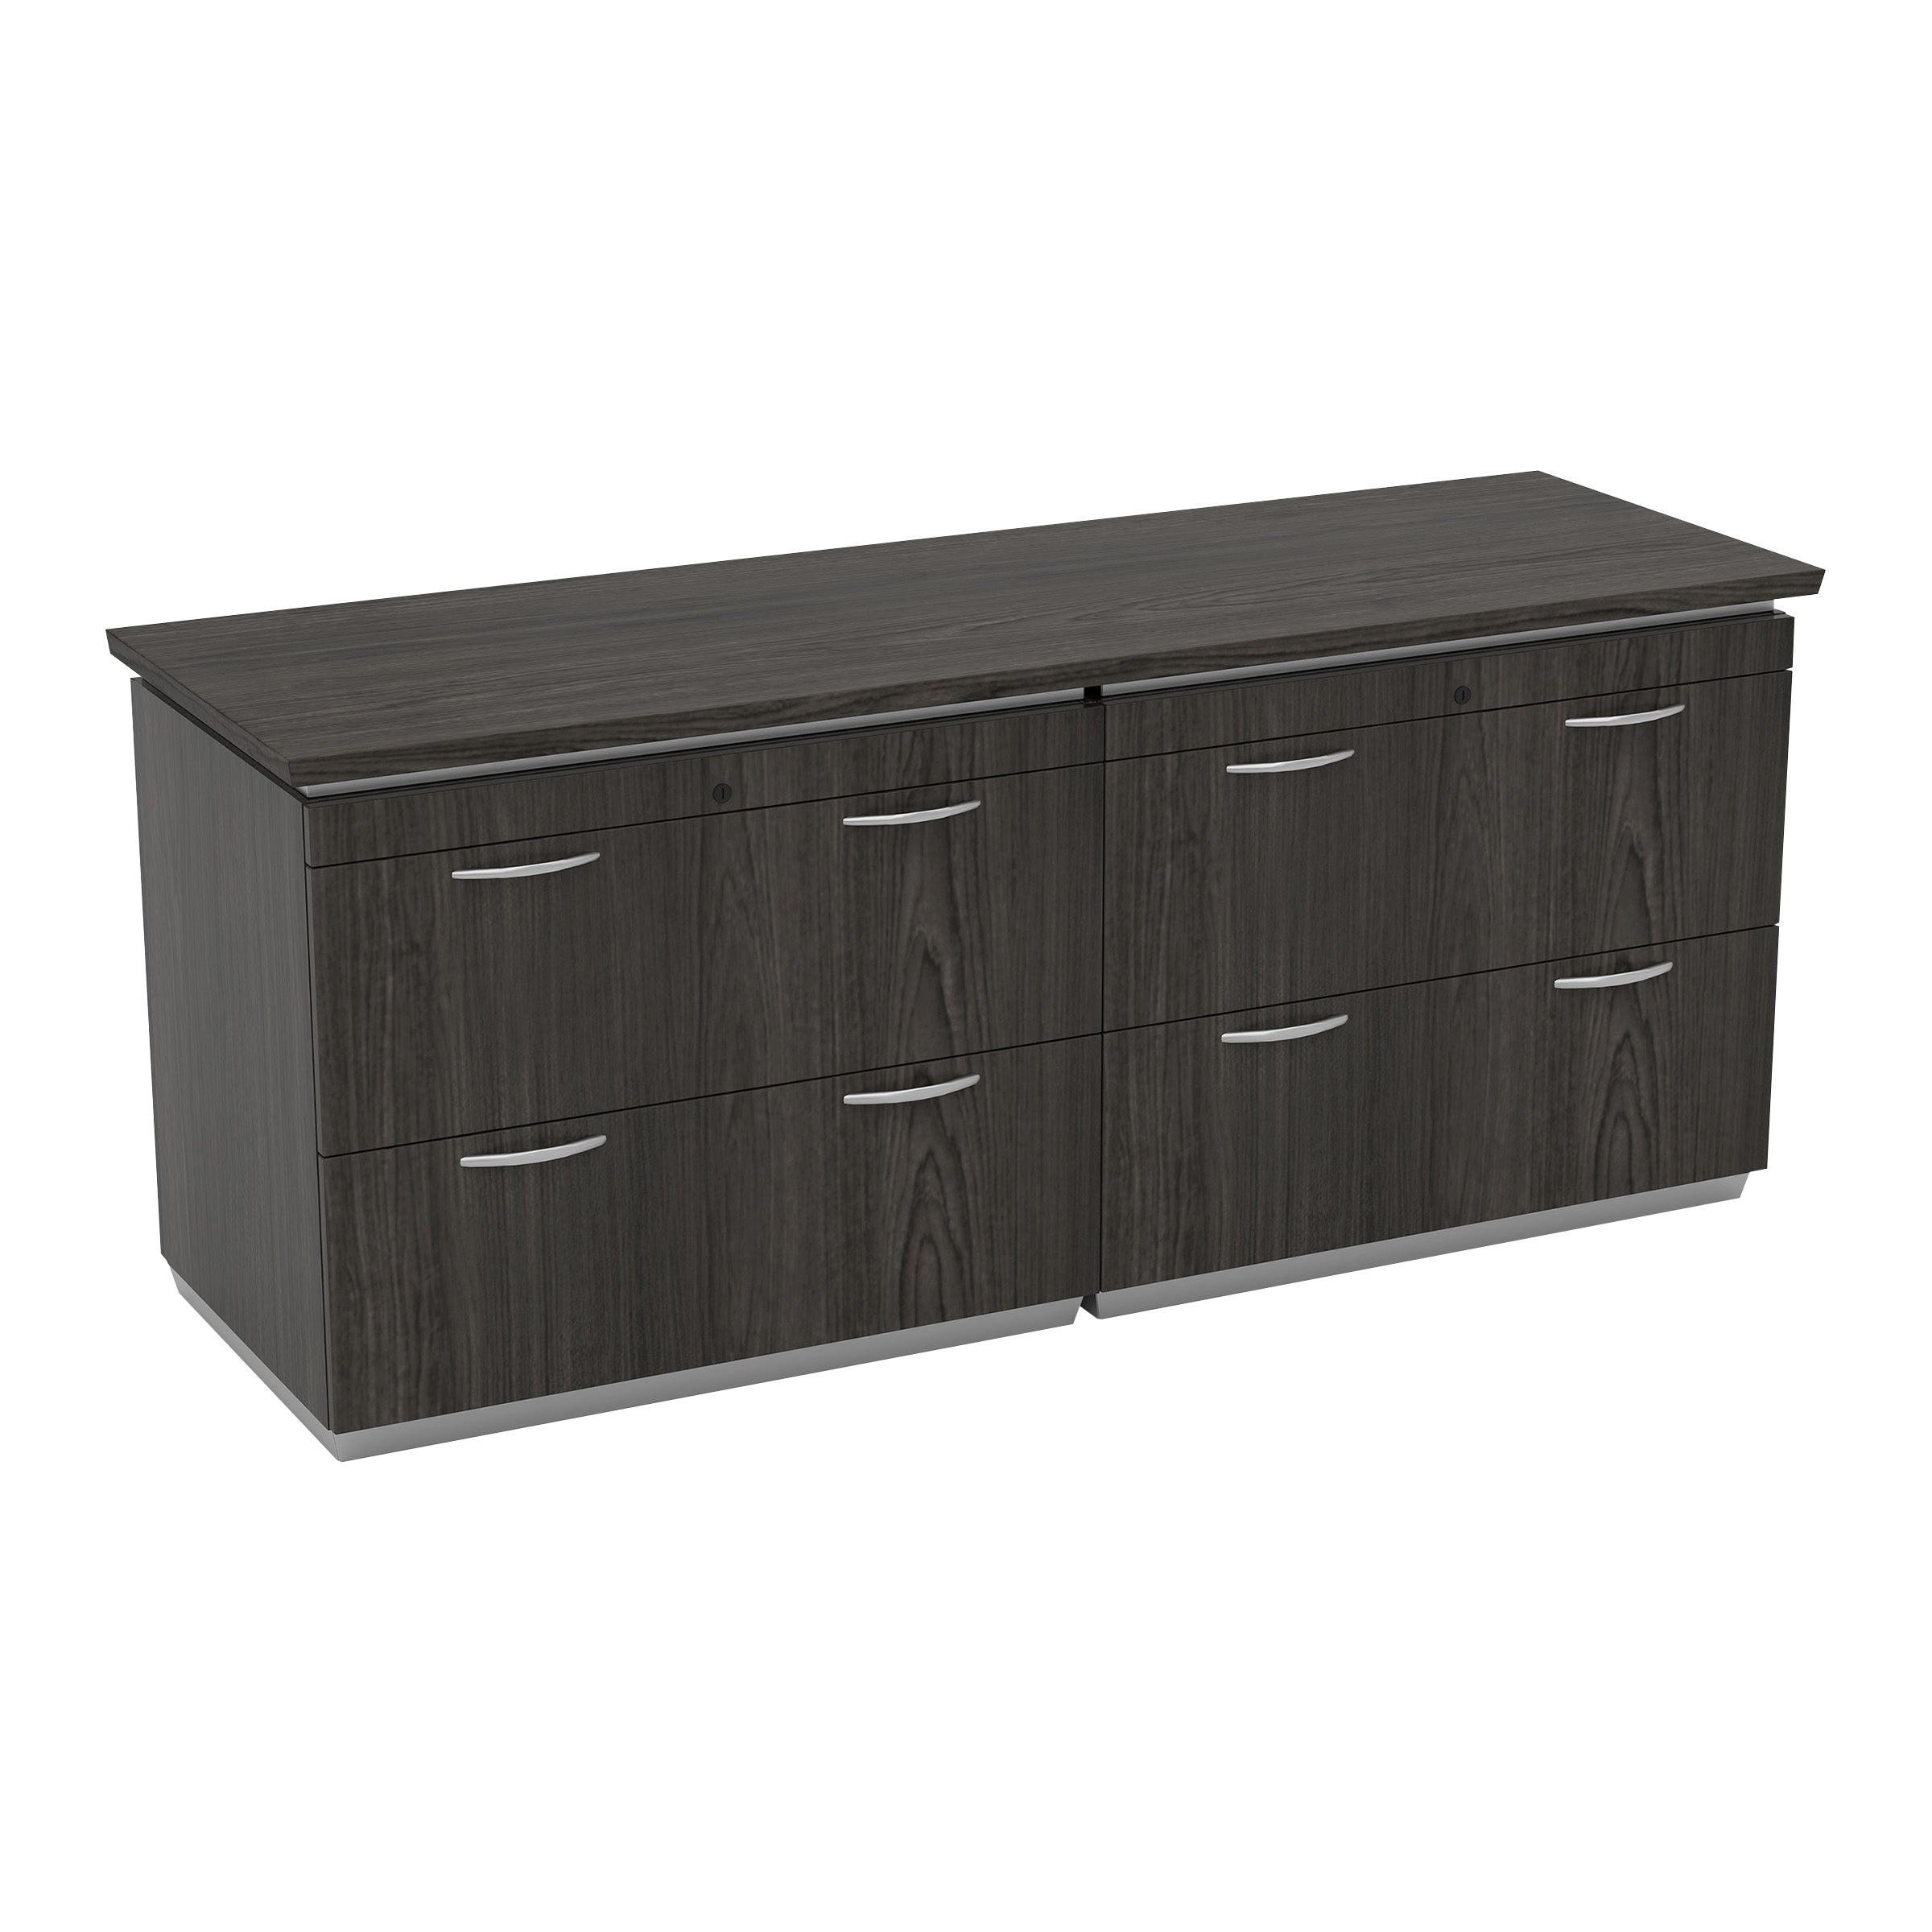 TUX-TYP206 - Tuxedo Series Double Lateral File Credenza by OSP